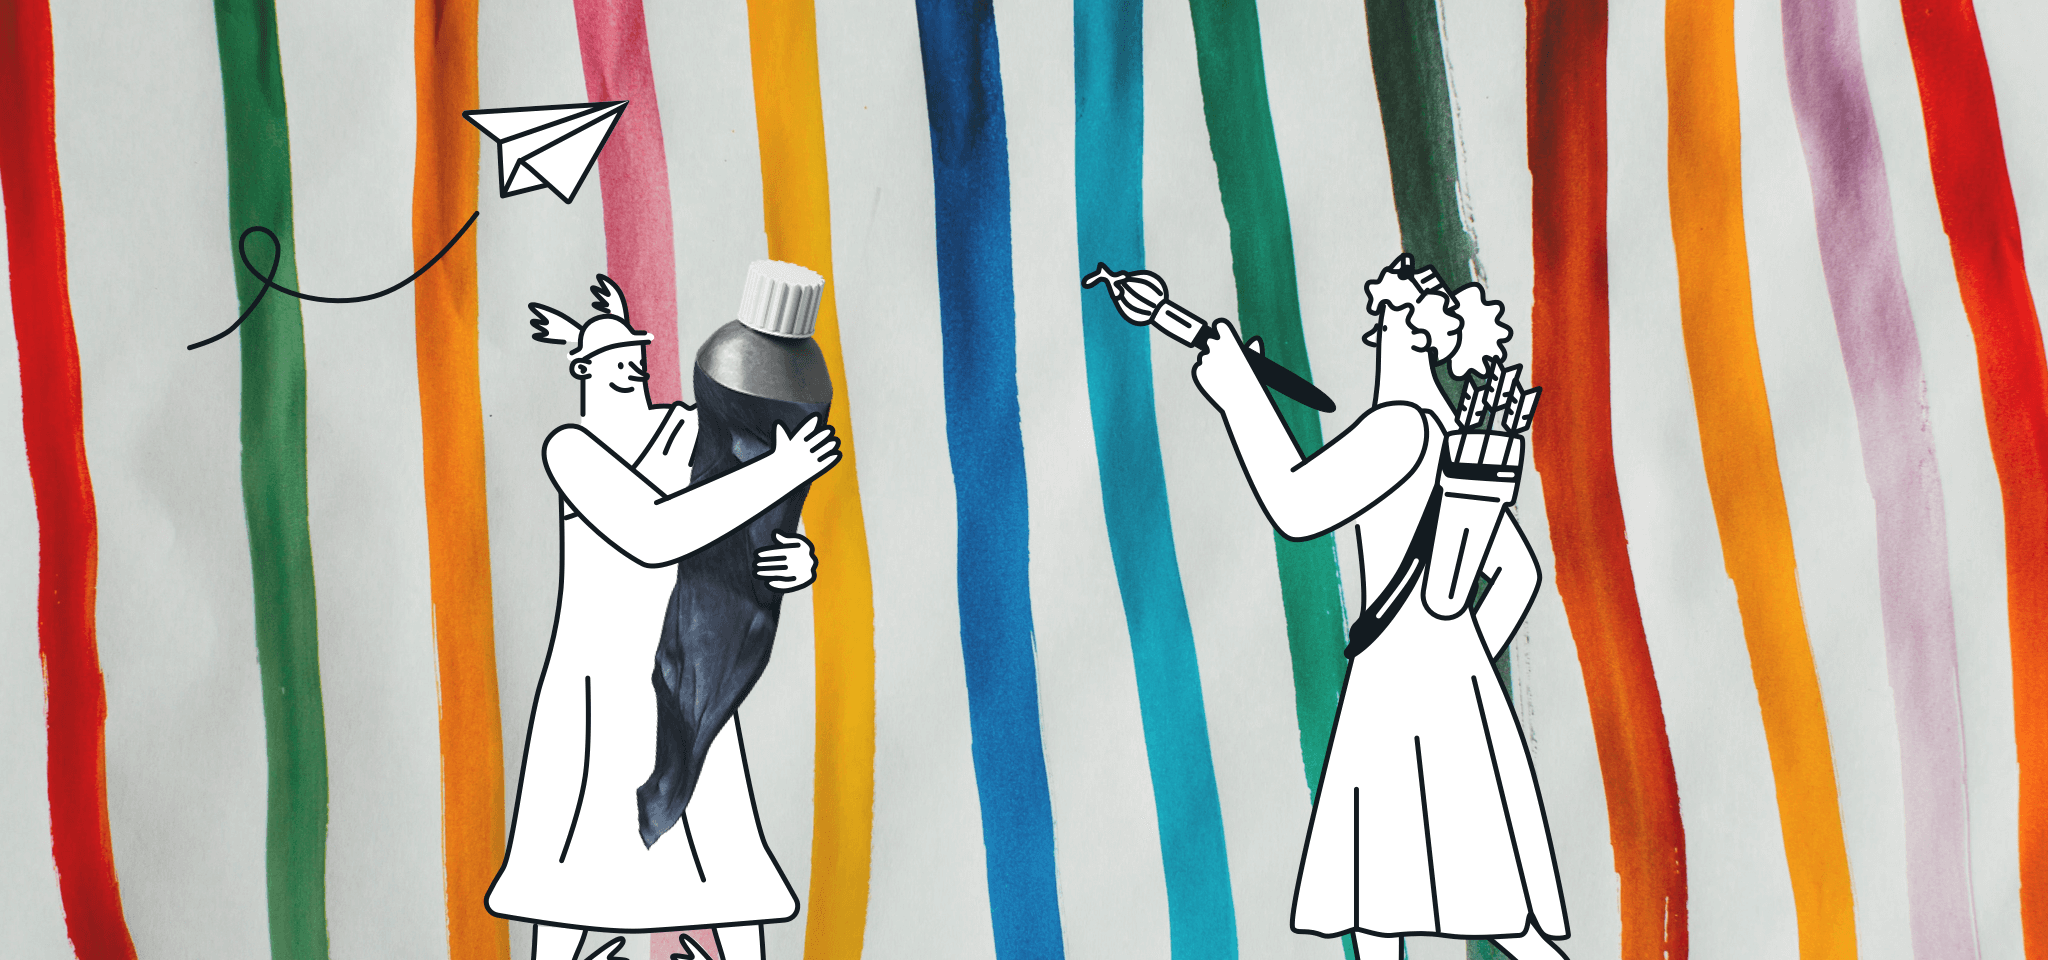 Hermes is helping a Goddess to paint colorful lines